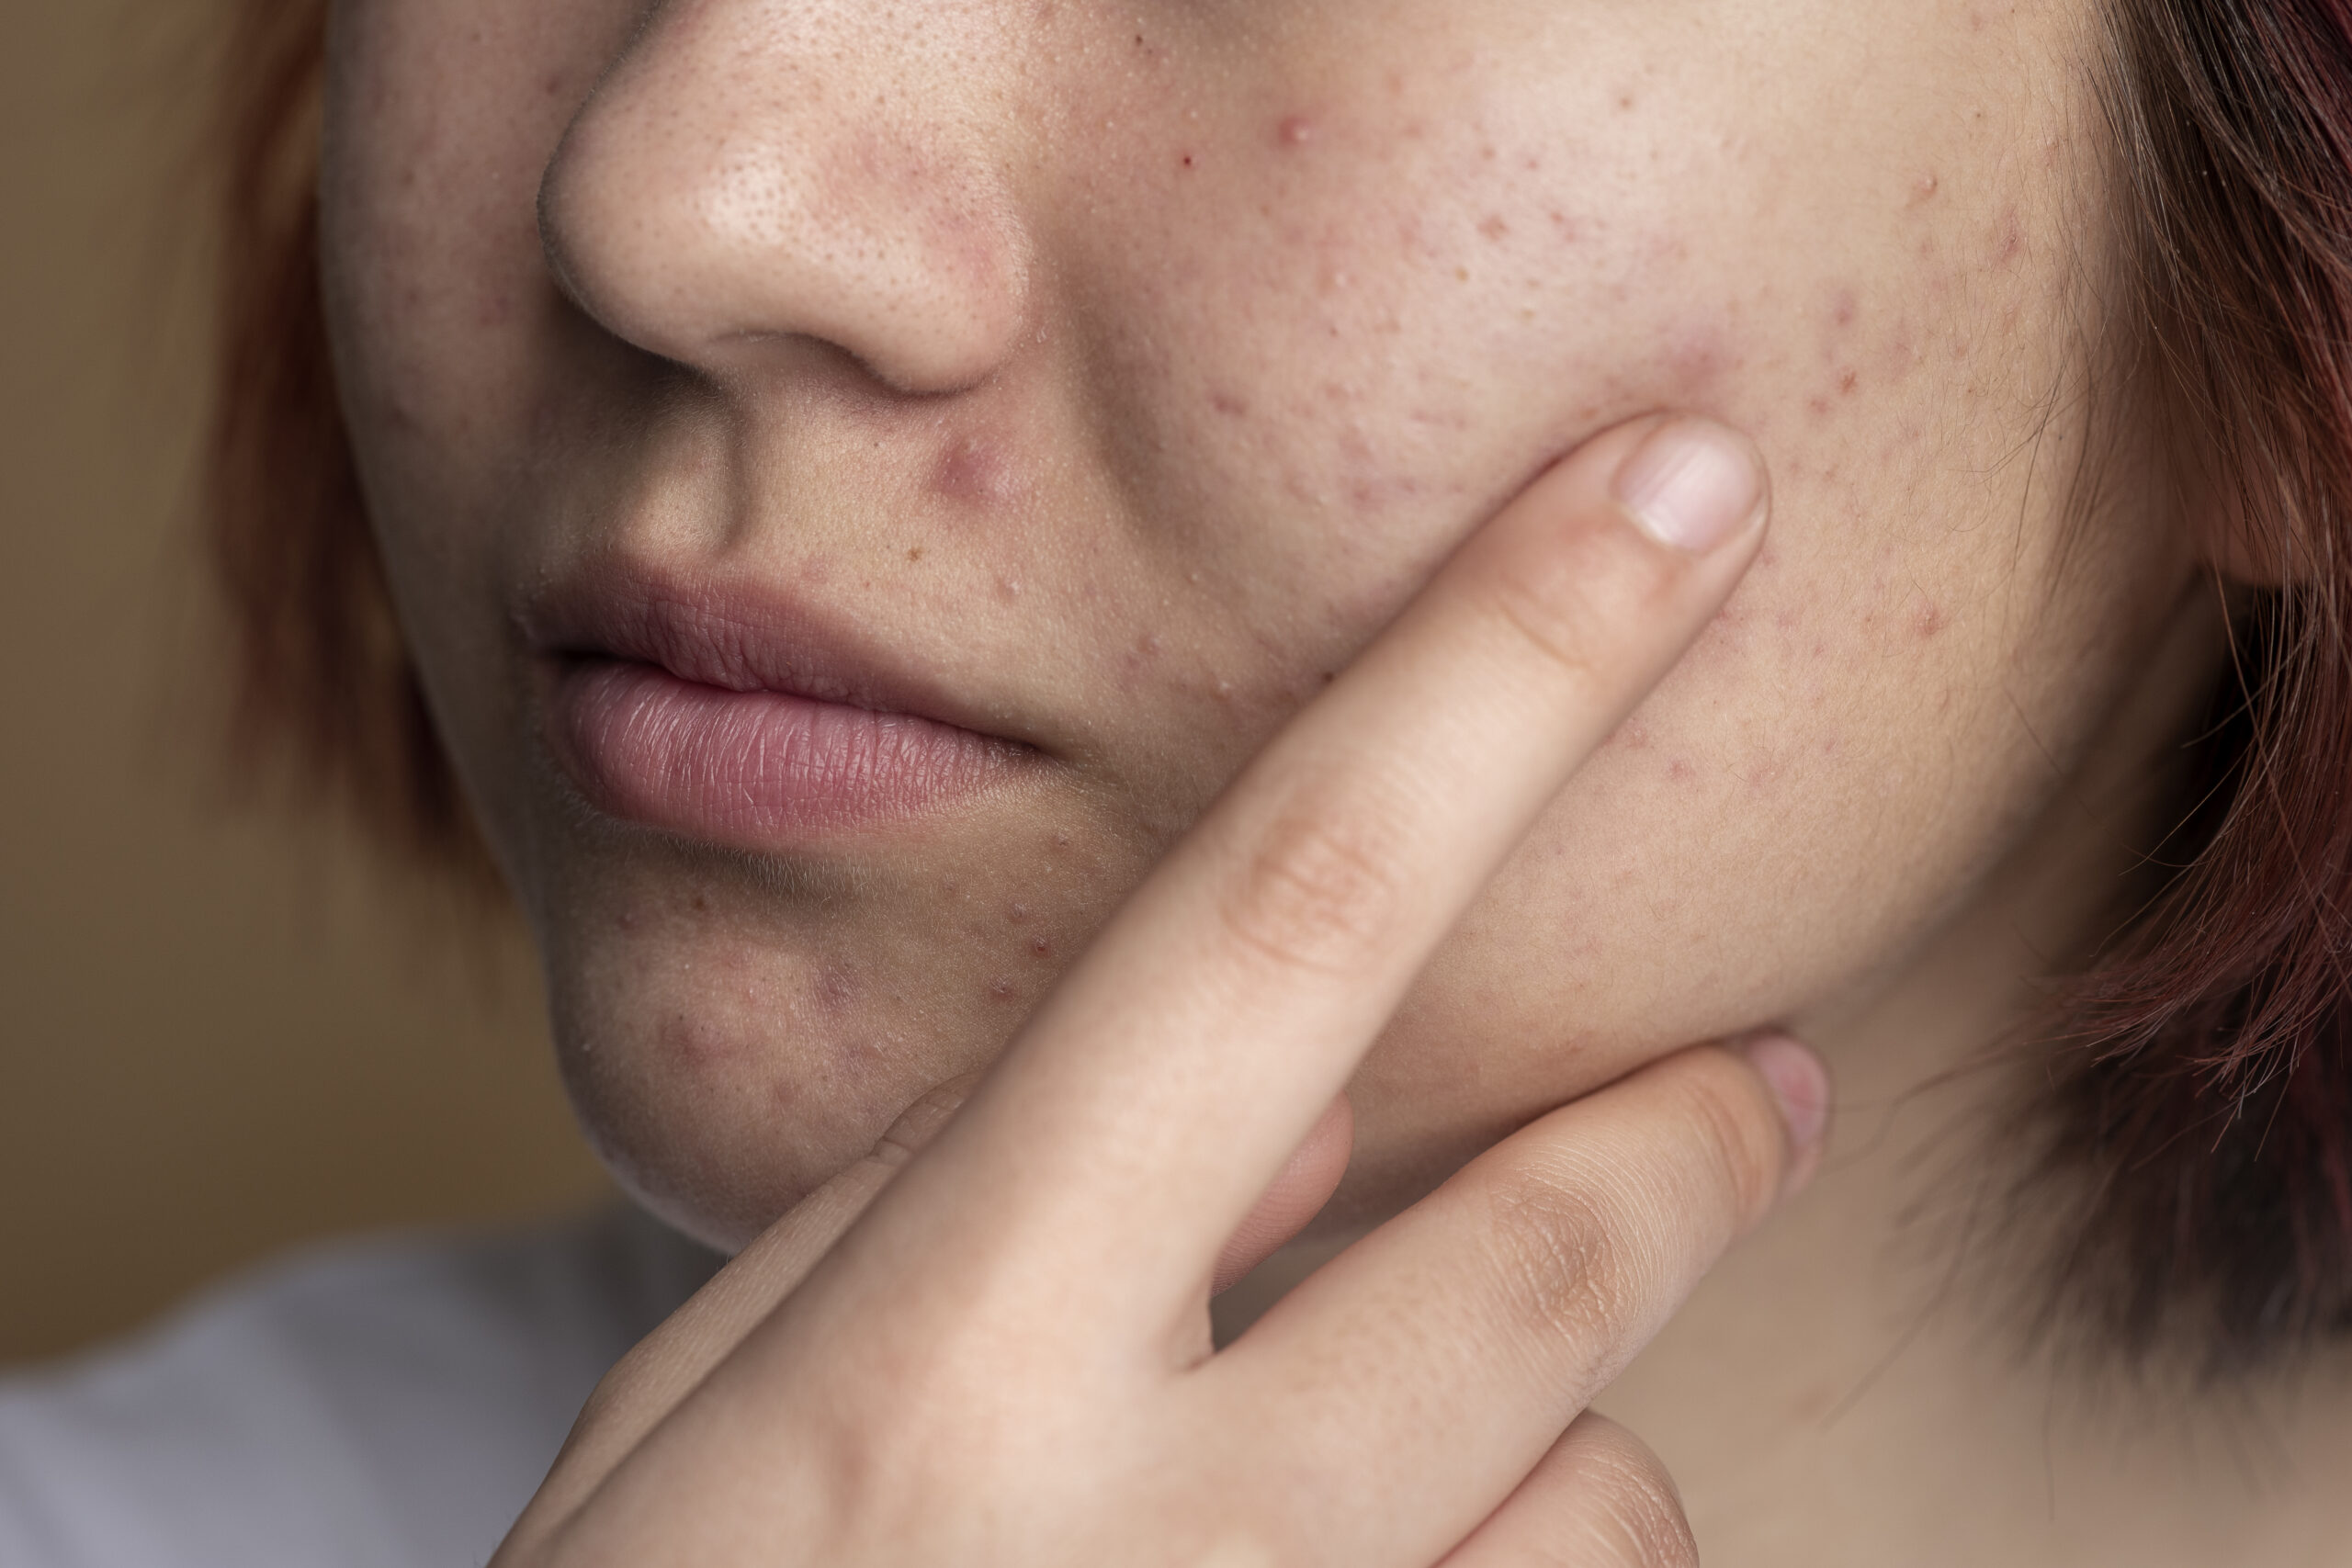 woman's face with breakouts and dark spots